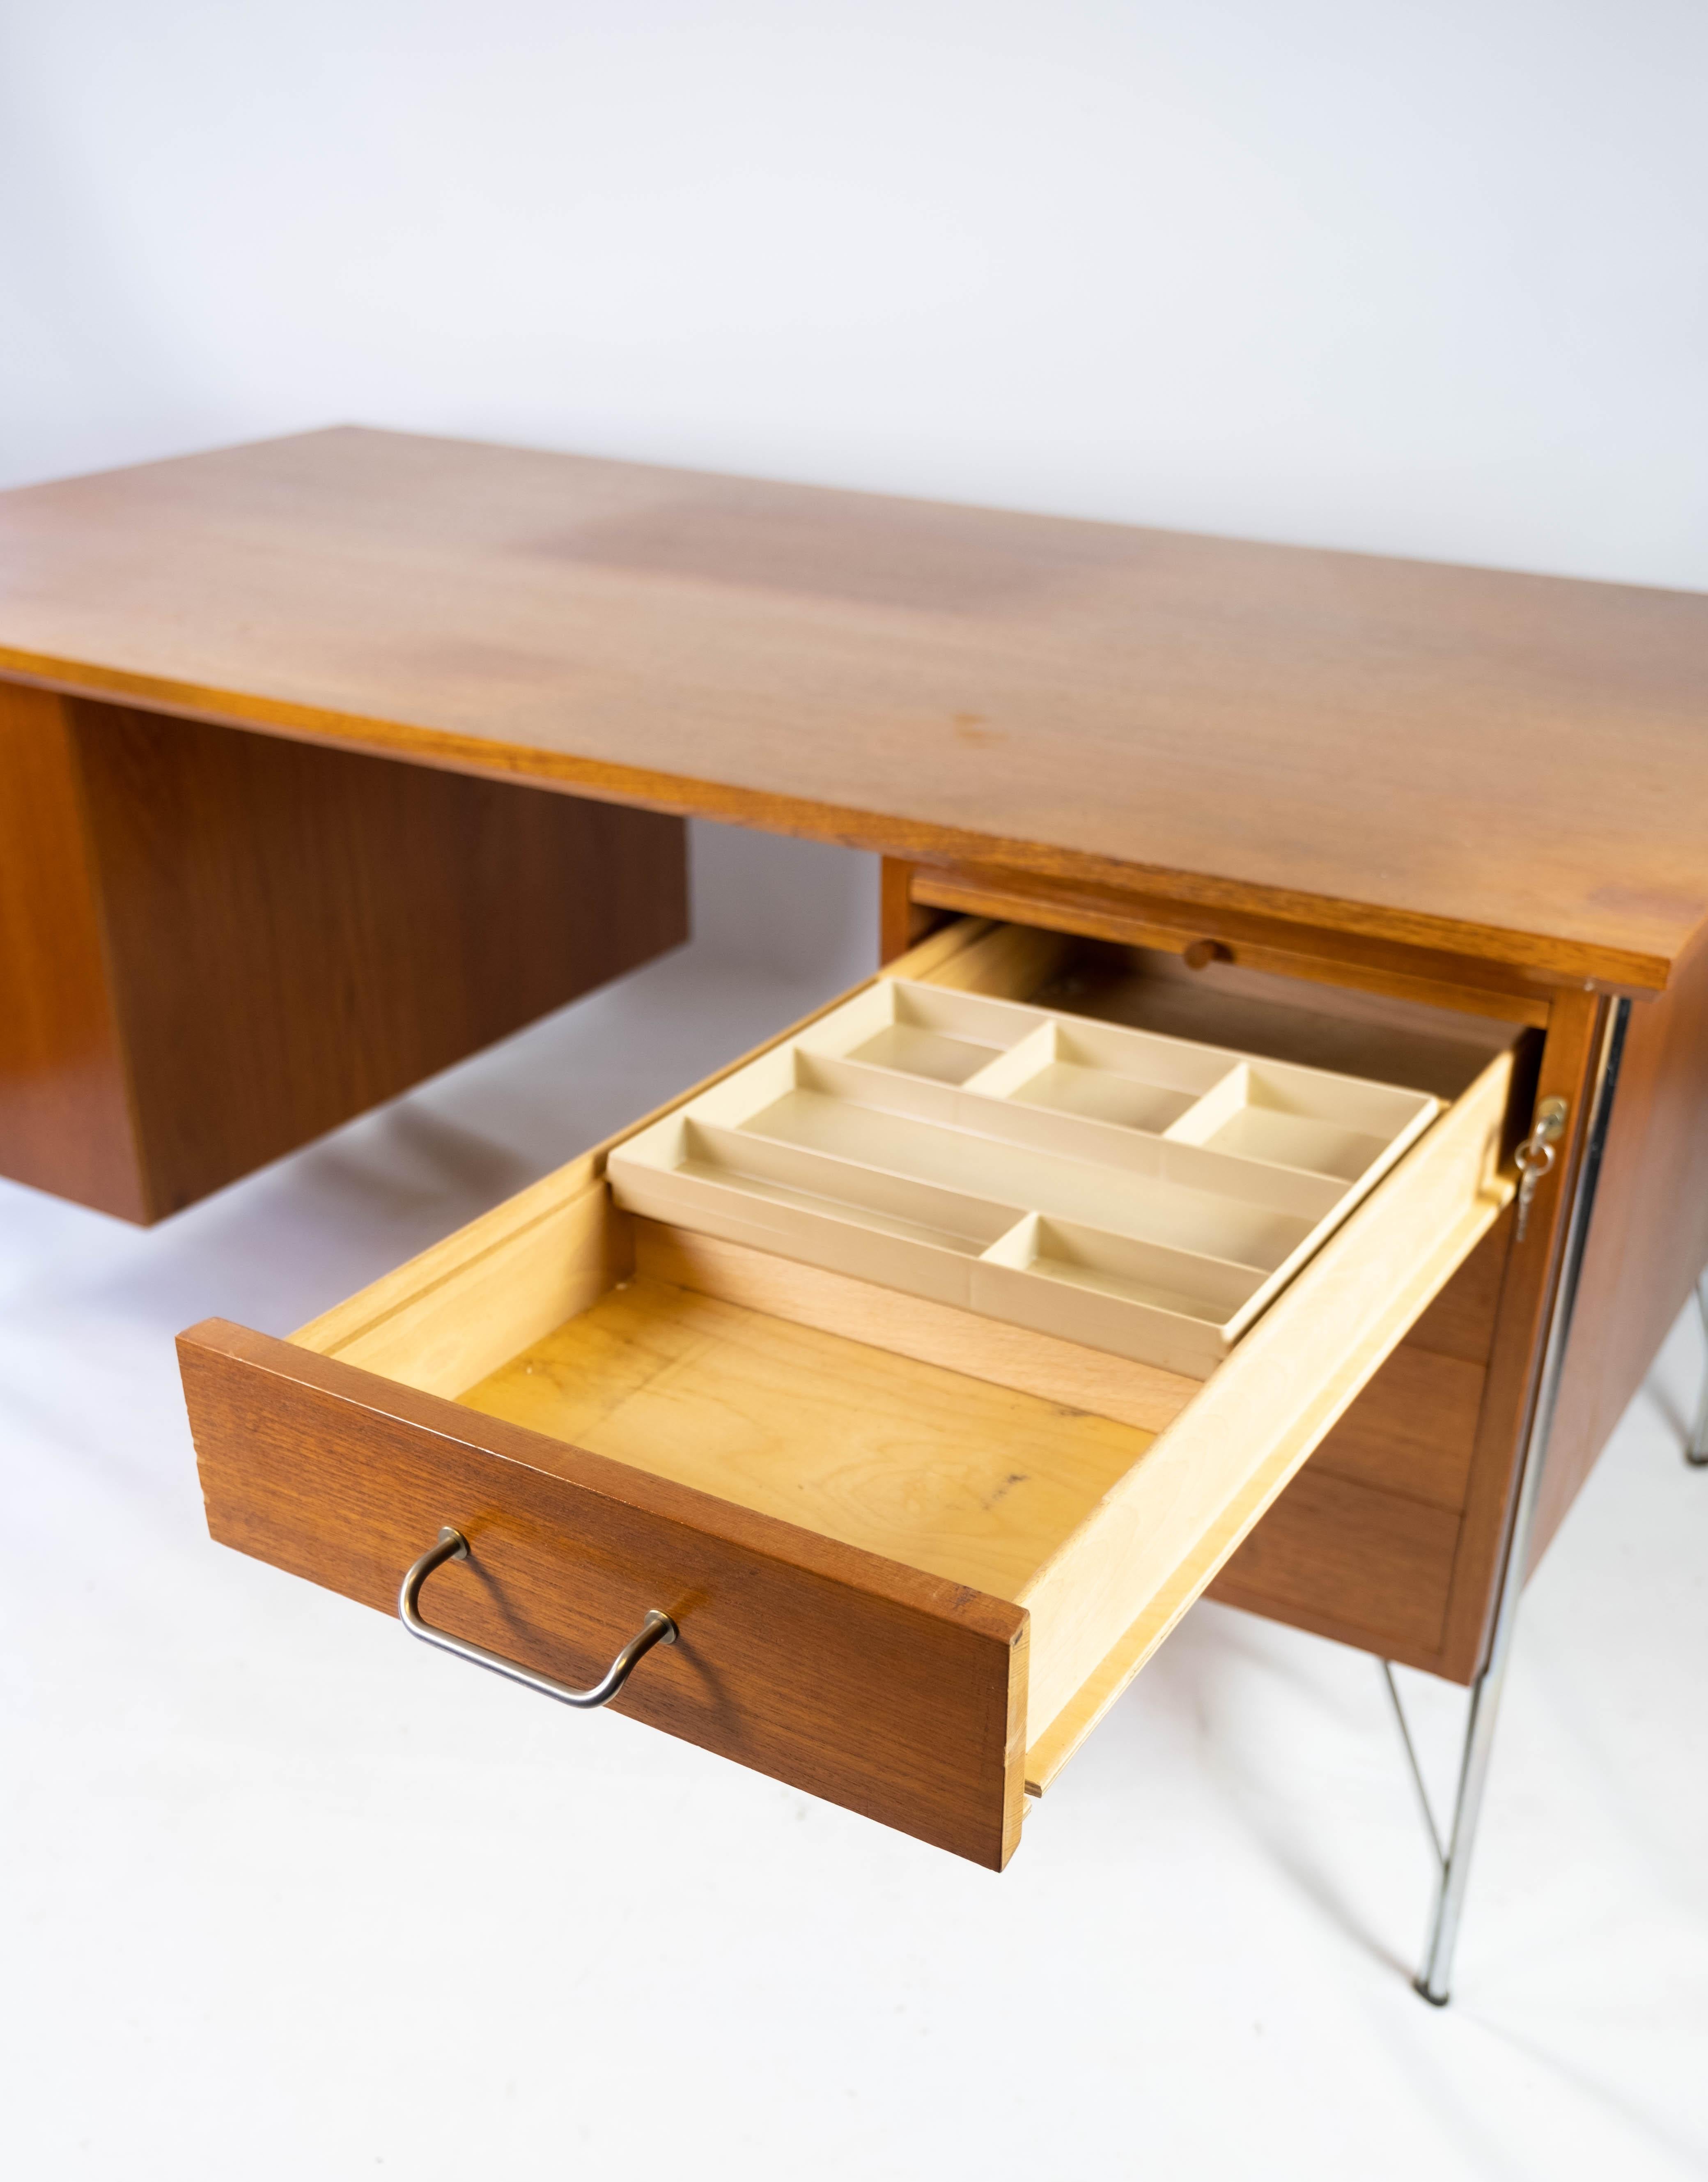 Mid-20th Century Desk in Teak of Danish Design from the 1970s For Sale